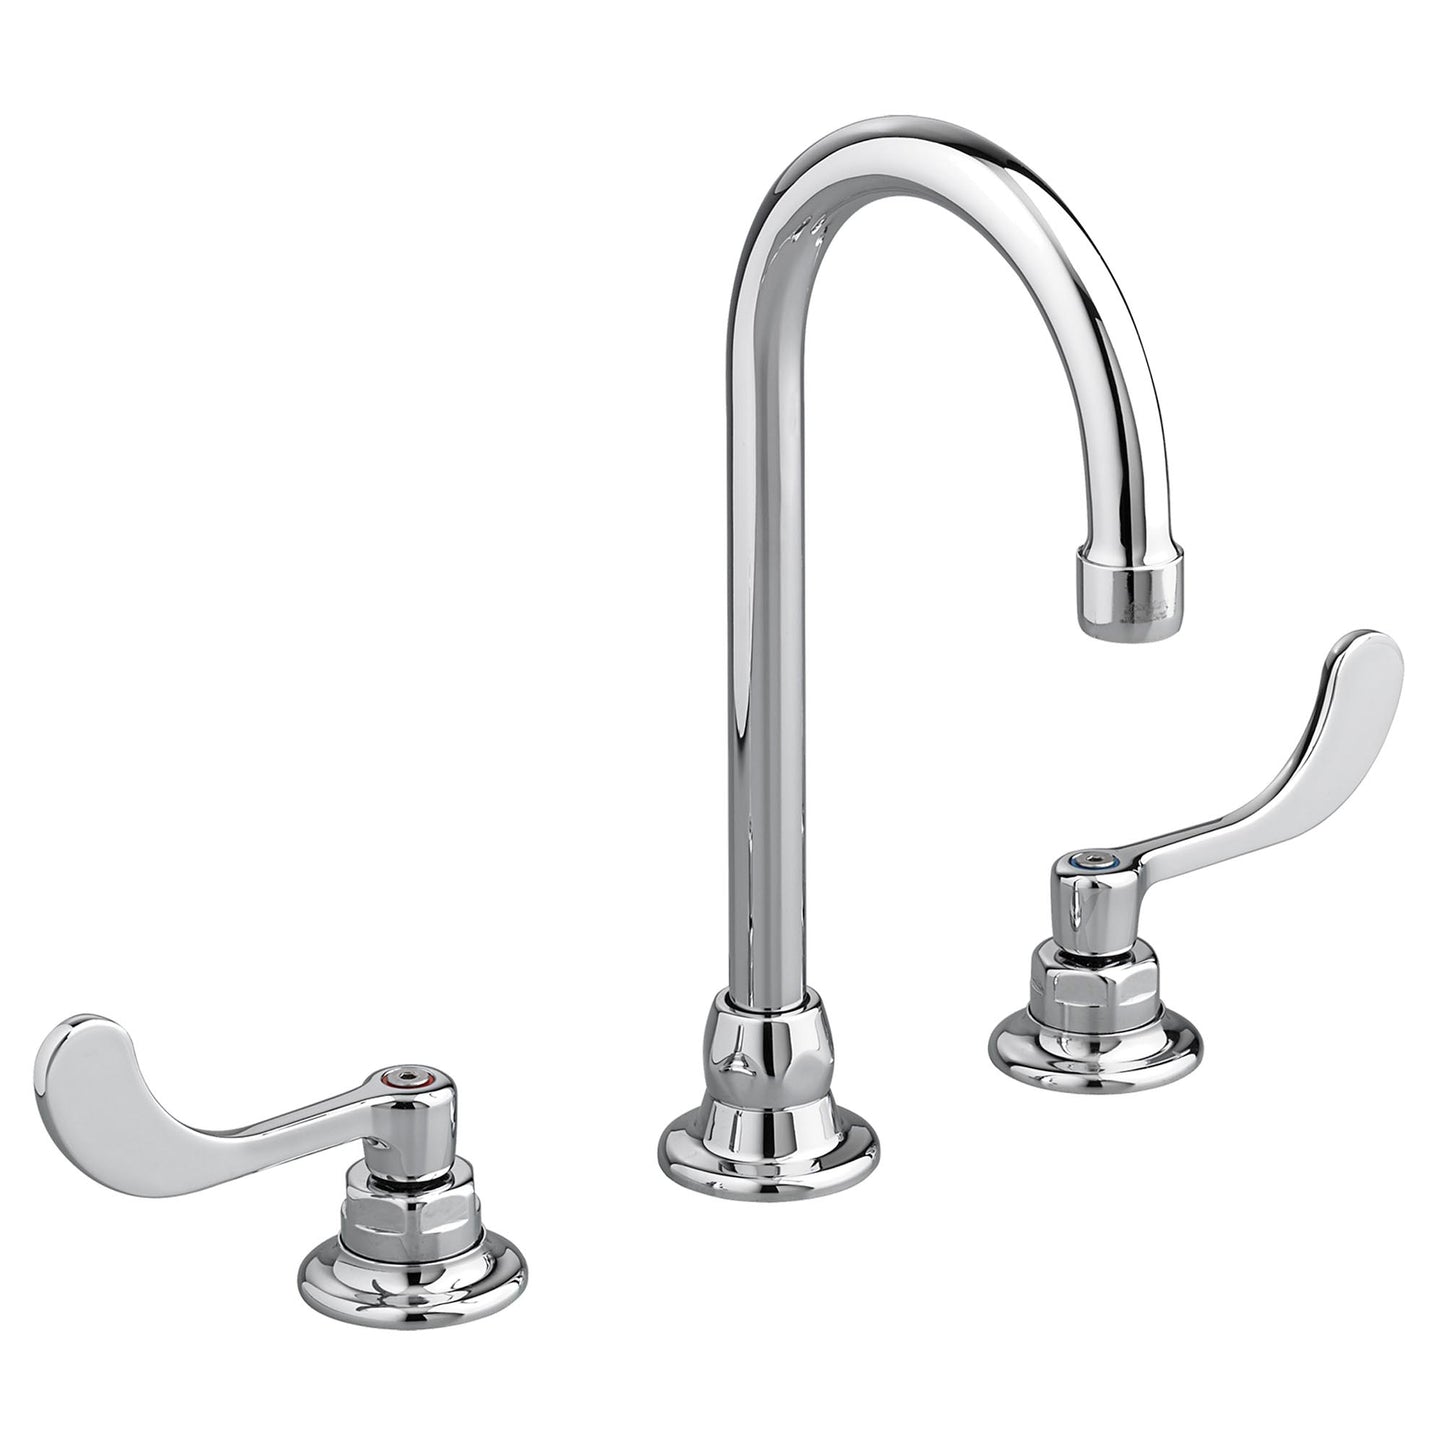 AMERICAN-STANDARD 6540170.002, Monterrey 8-Inch Widespread Gooseneck Faucet With Wrist Blade Handles 1.5 gpm/5.7 Lpm in Chrome